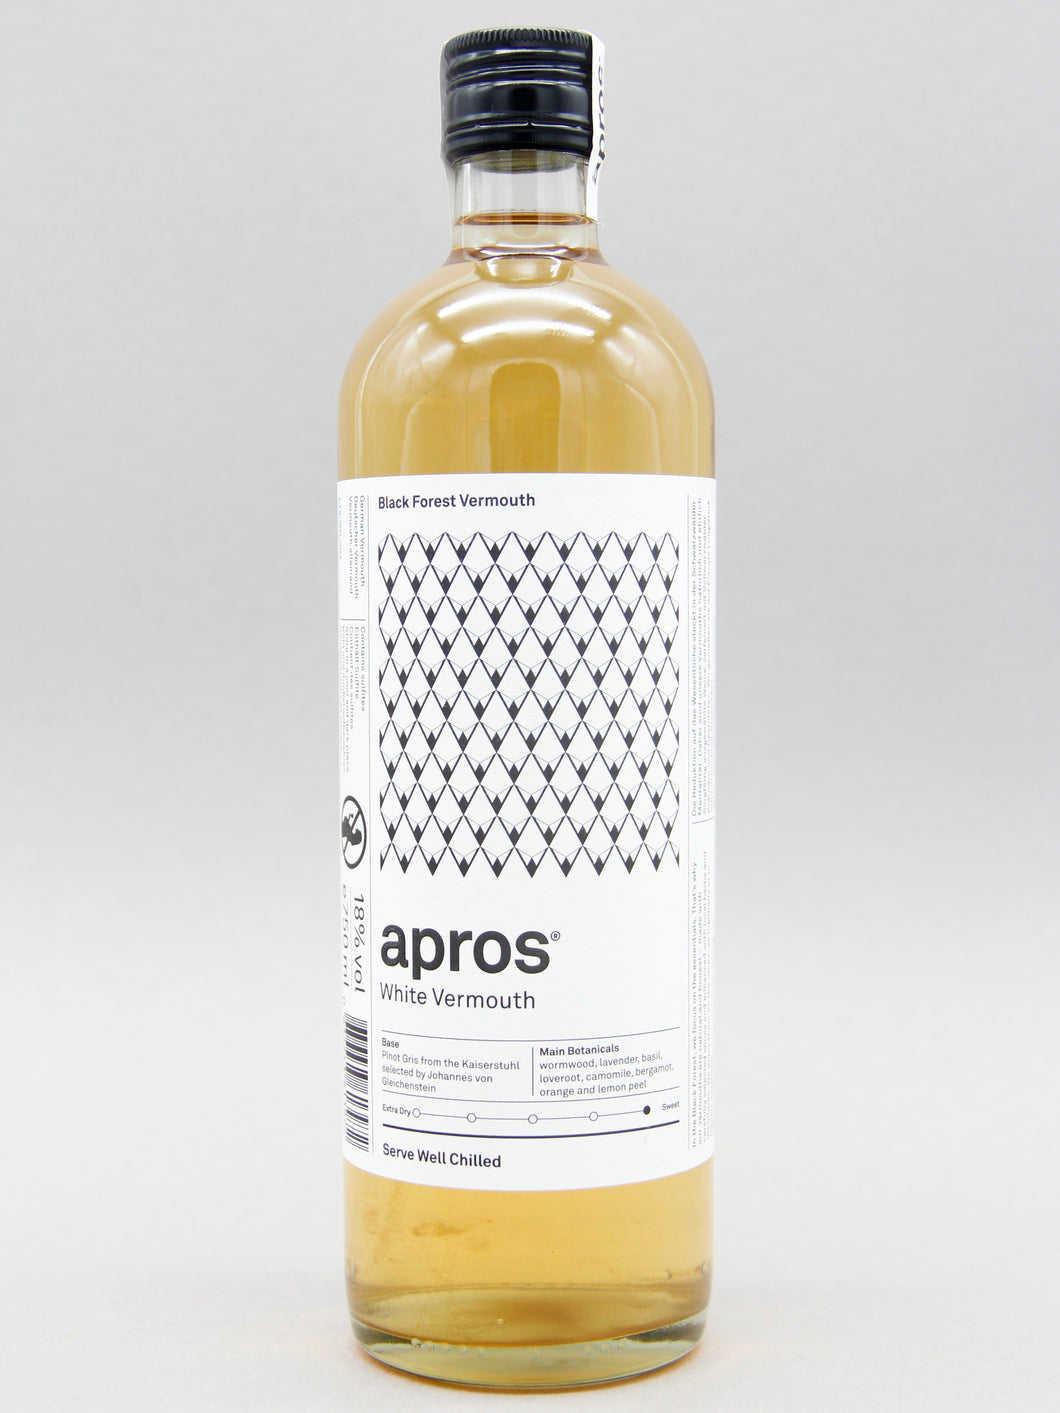 Apros White, Black Forest Vermouth, Germany (18%, 75cl)